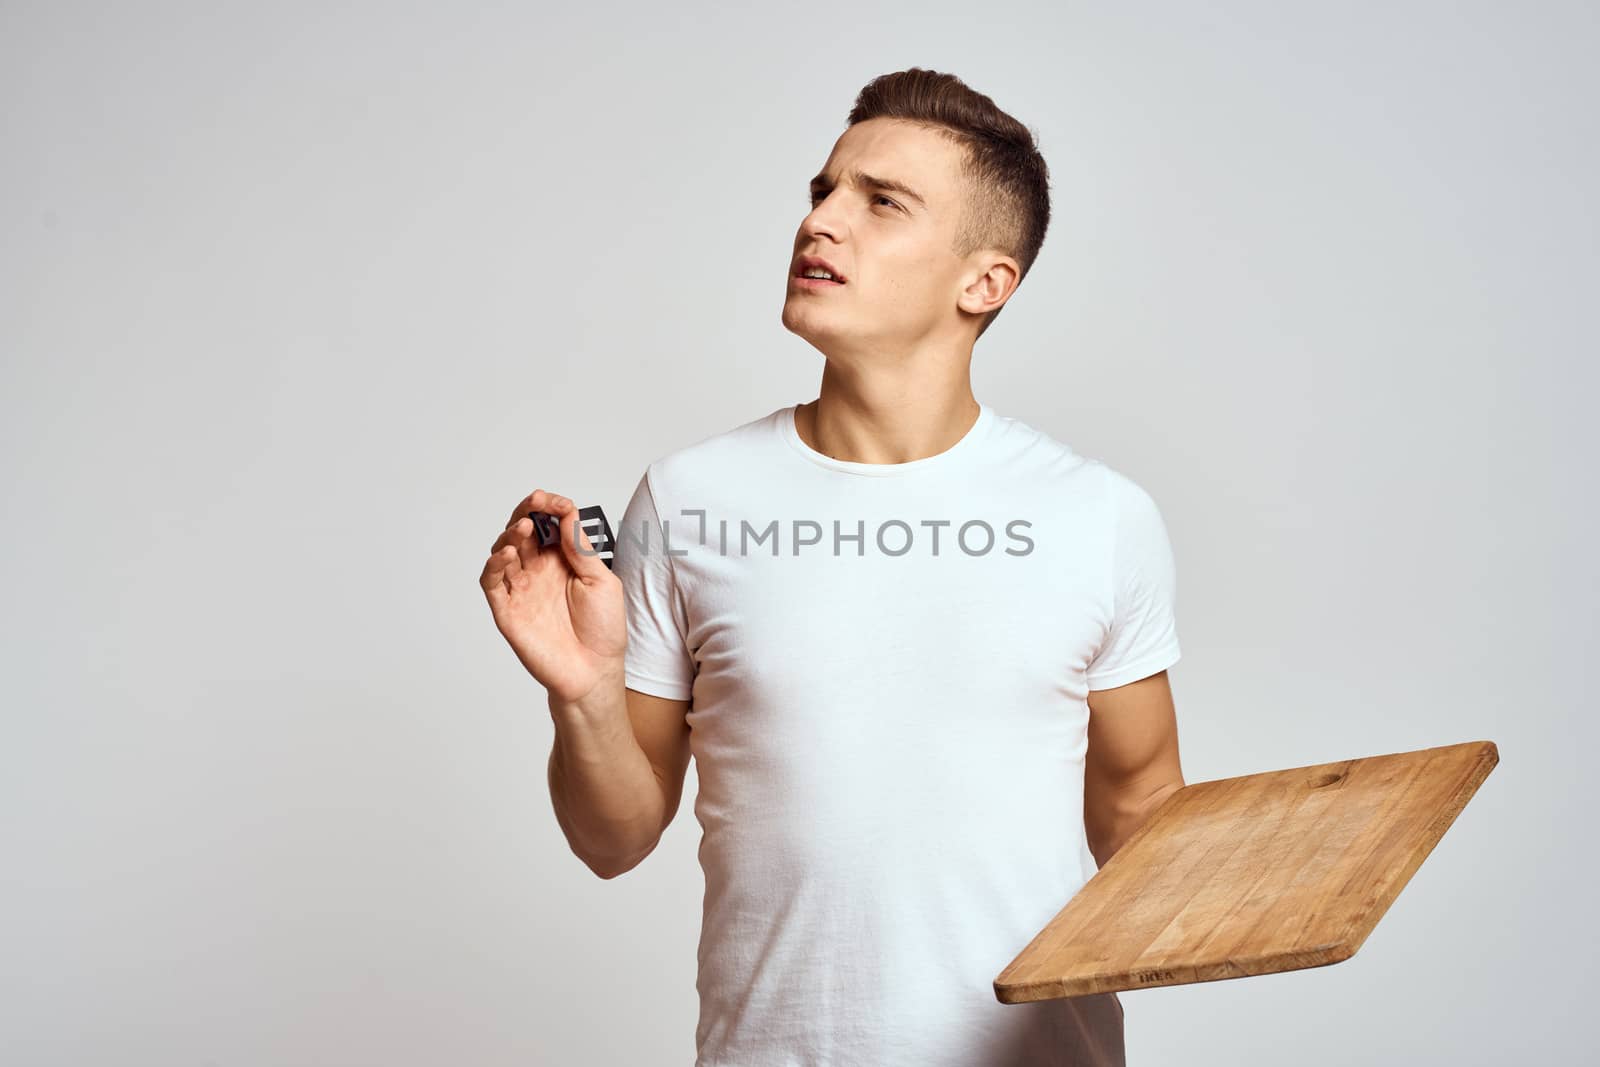 Guy with kitchen tools in hands on a light background cropped view of emotions fun model. High quality photo